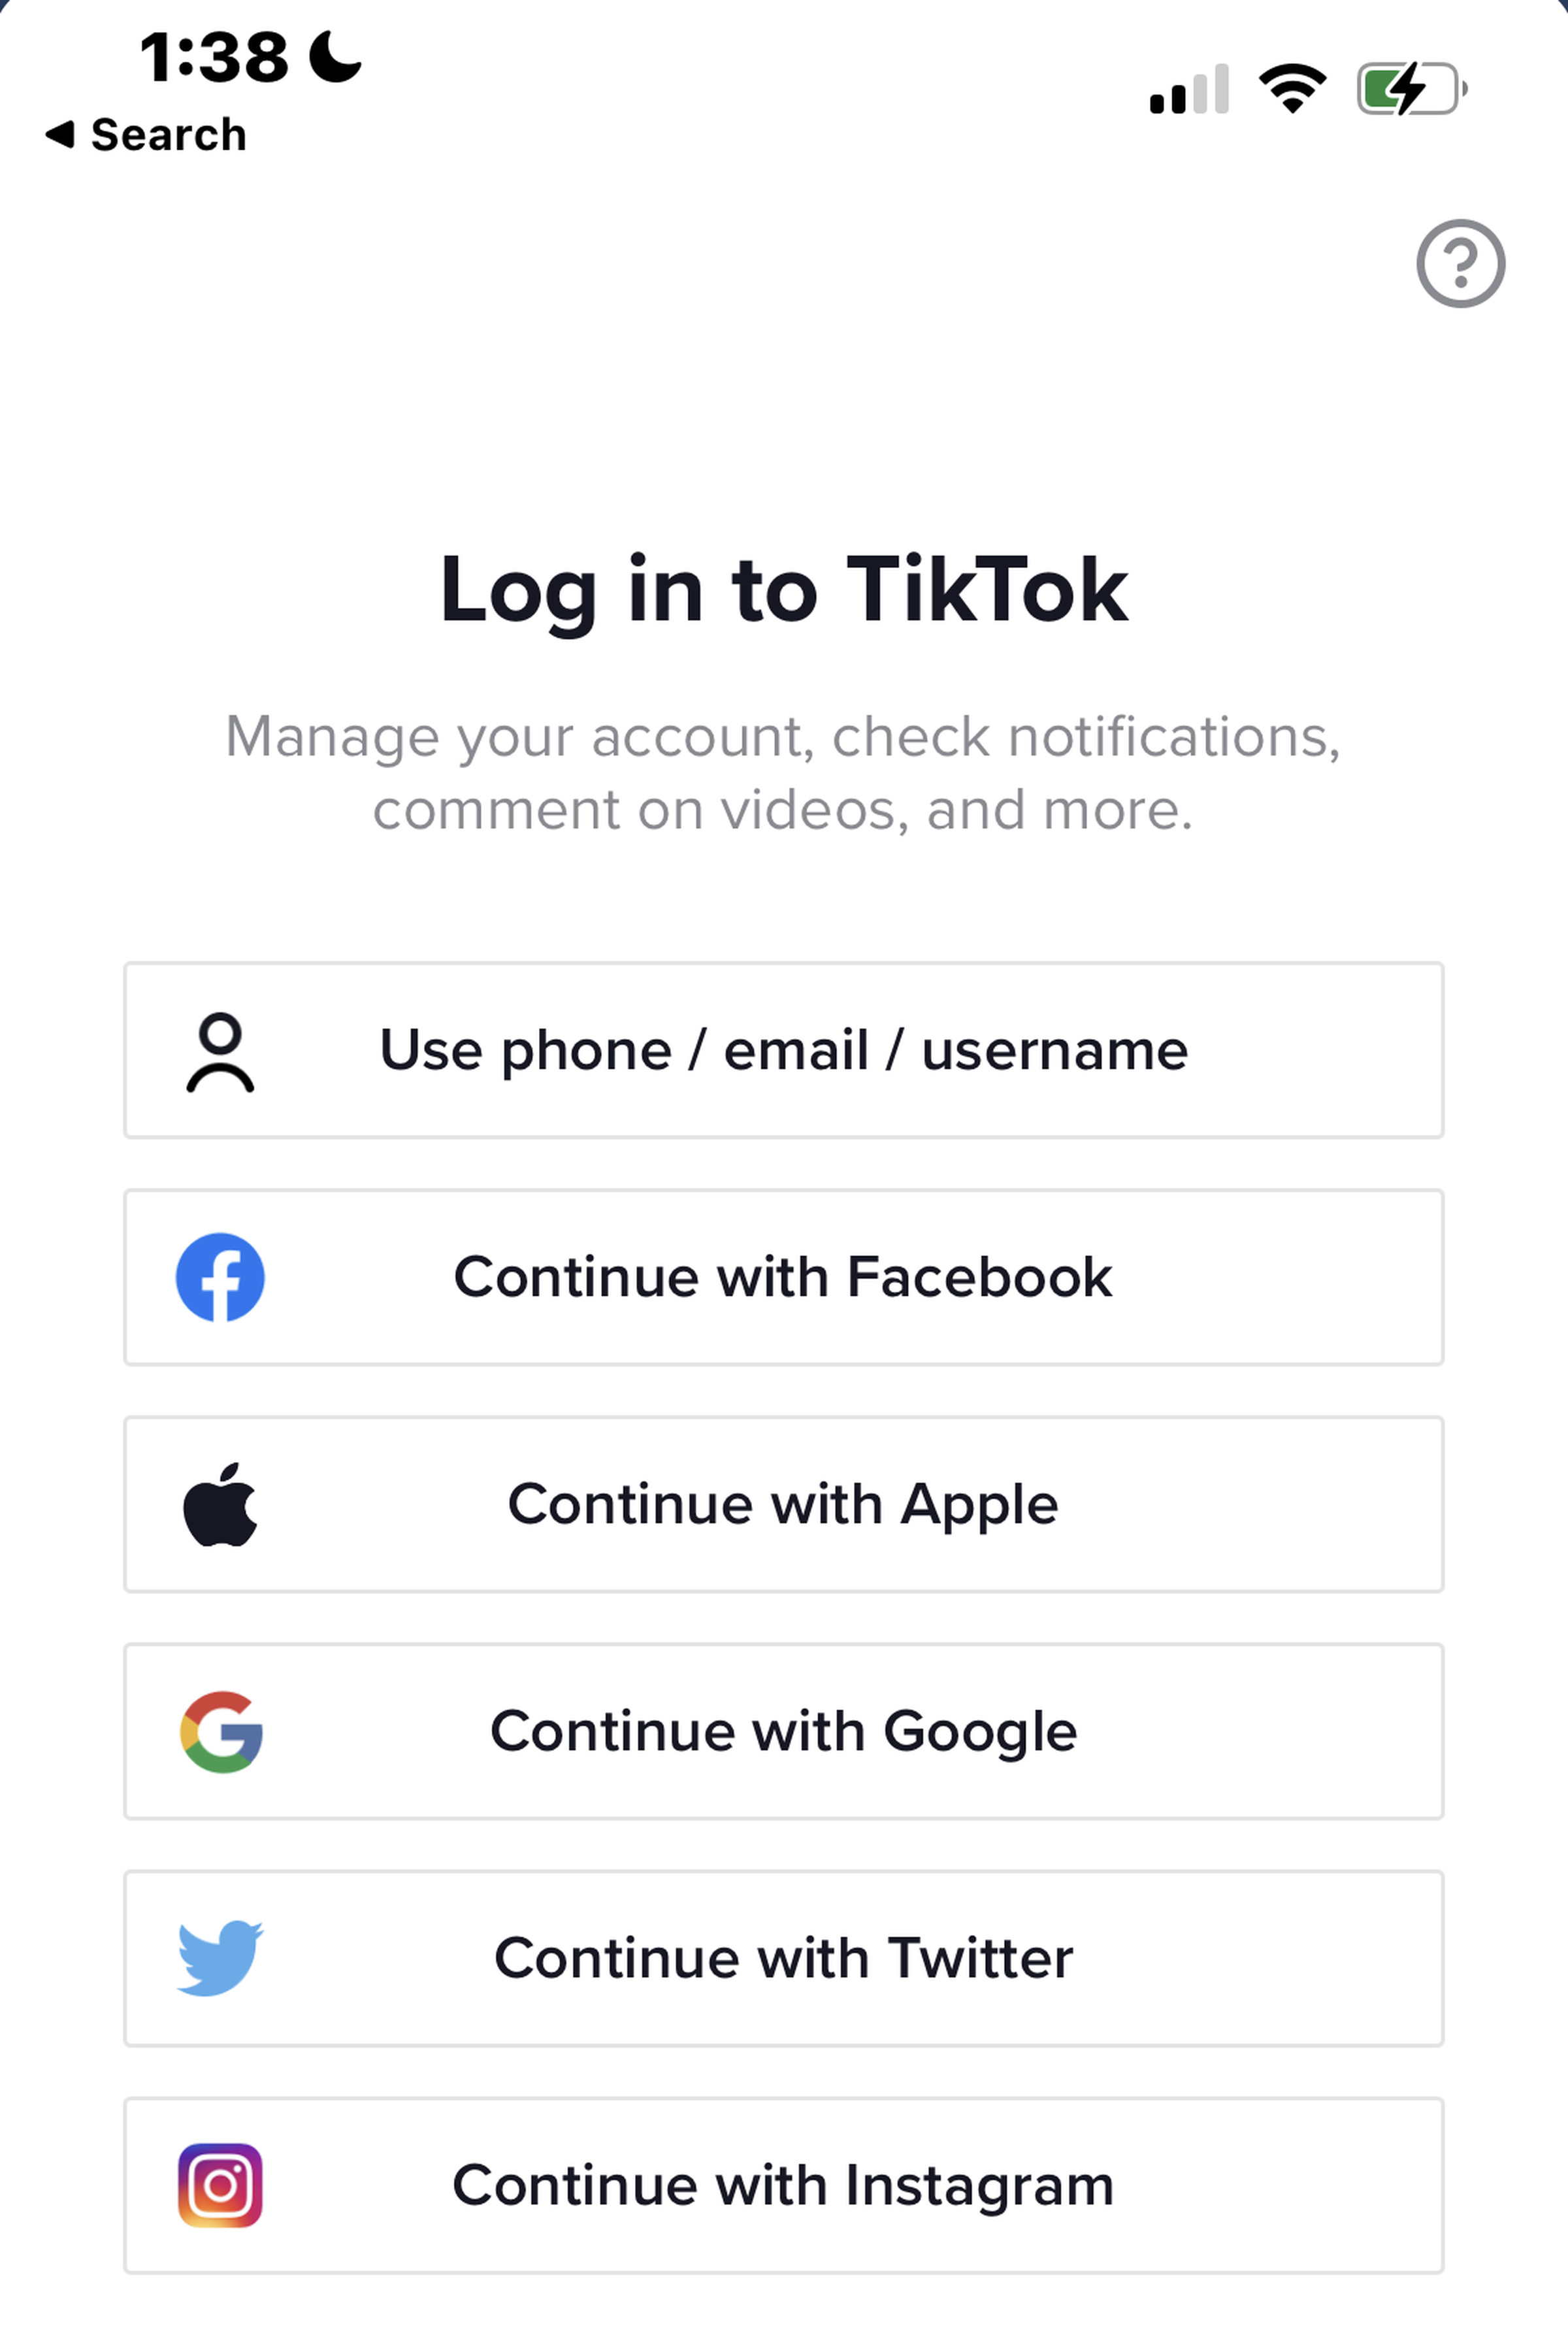 A screenshot of TikTok’s login screen, with options to continue through Facebook, Apple, Google, Twitter or Instagram.